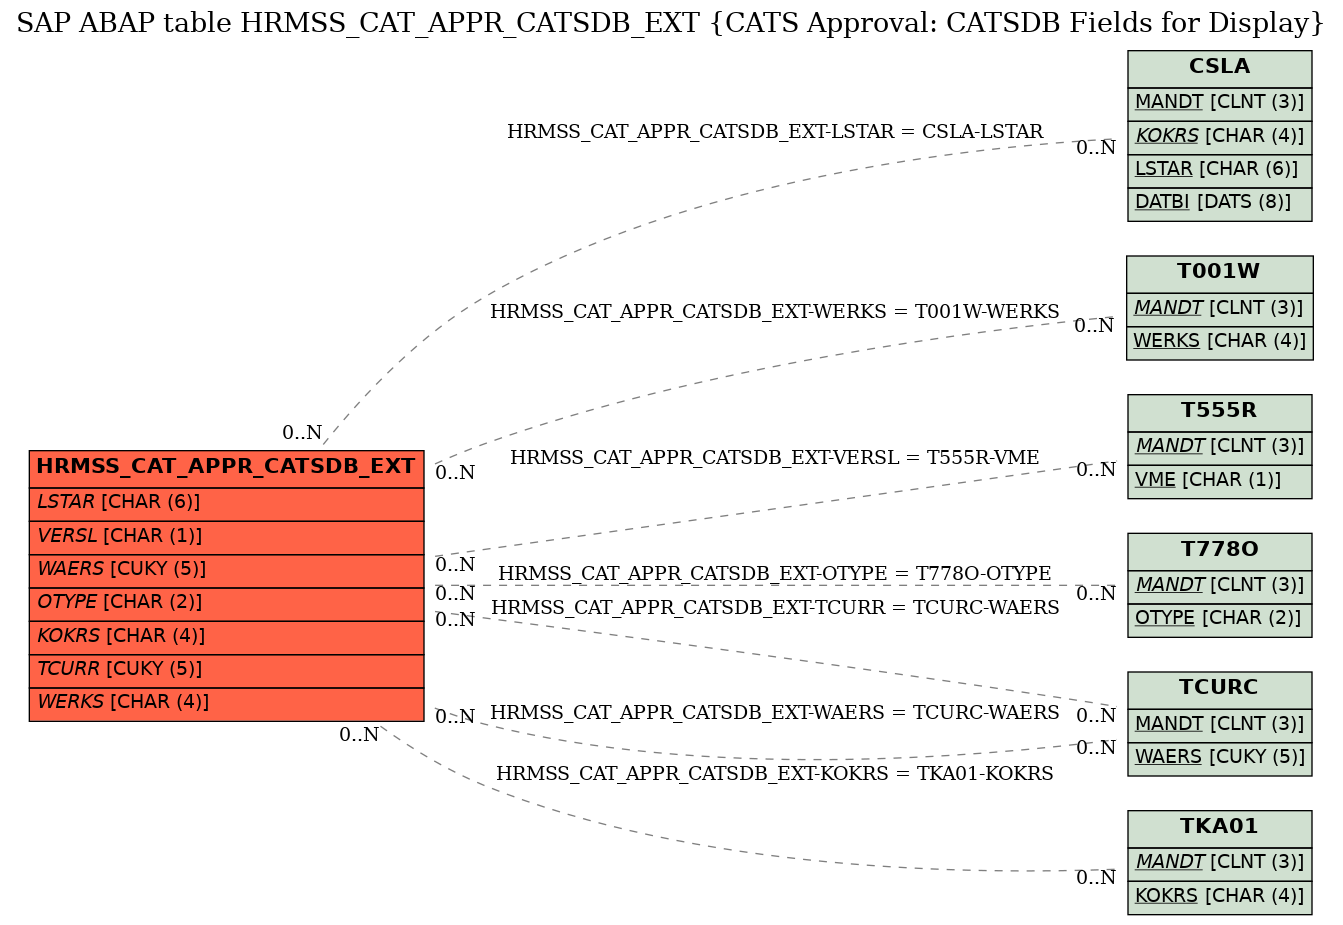 E-R Diagram for table HRMSS_CAT_APPR_CATSDB_EXT (CATS Approval: CATSDB Fields for Display)